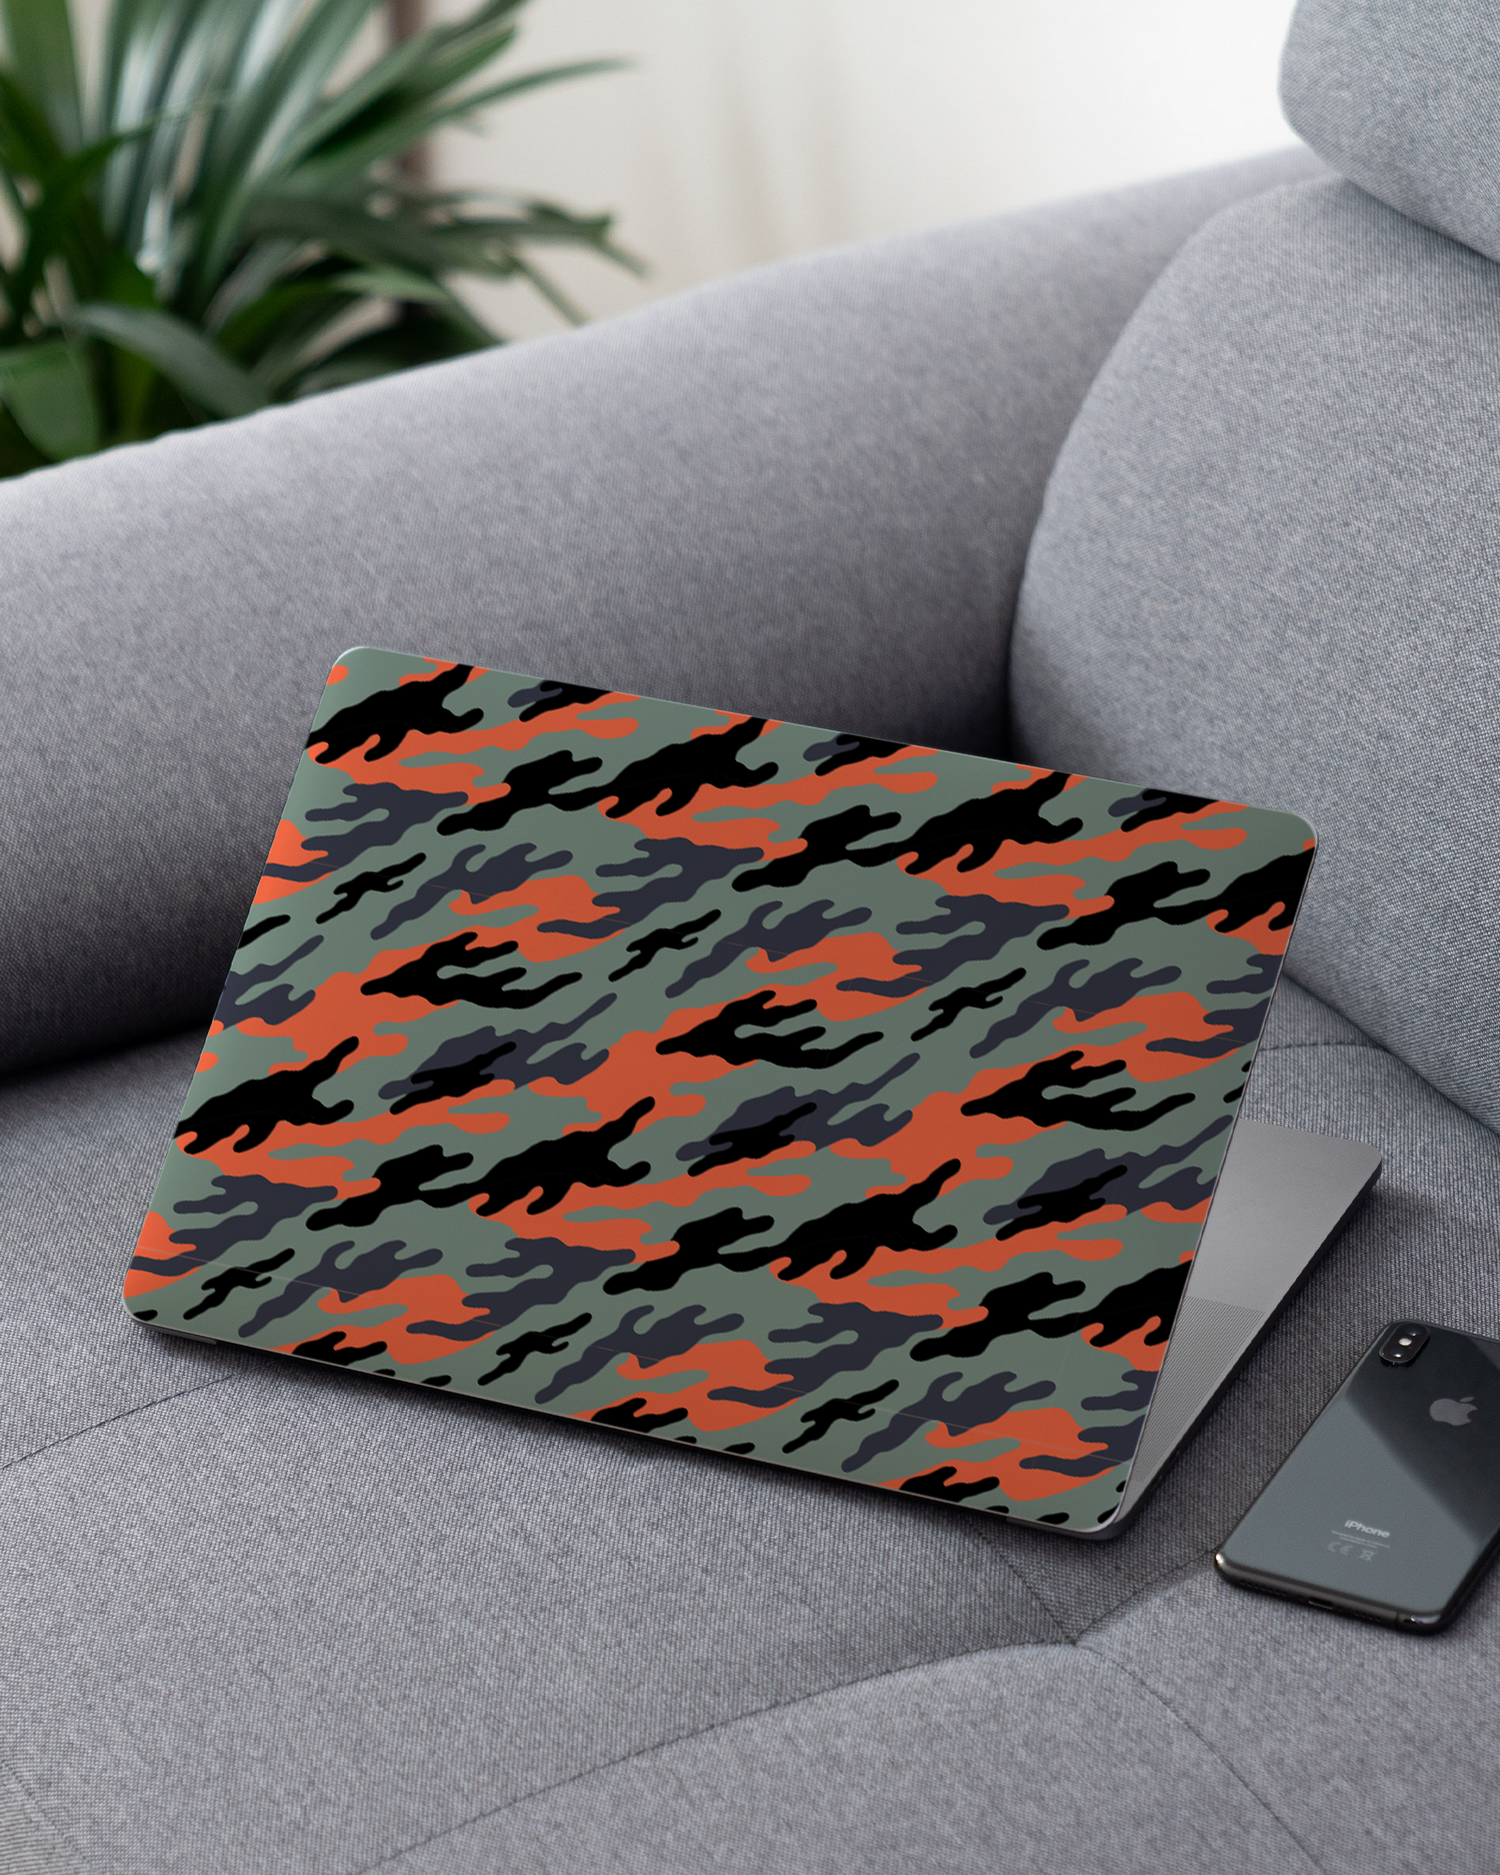 Camo Sunset Laptop Skin for 13 inch Apple MacBooks on a couch